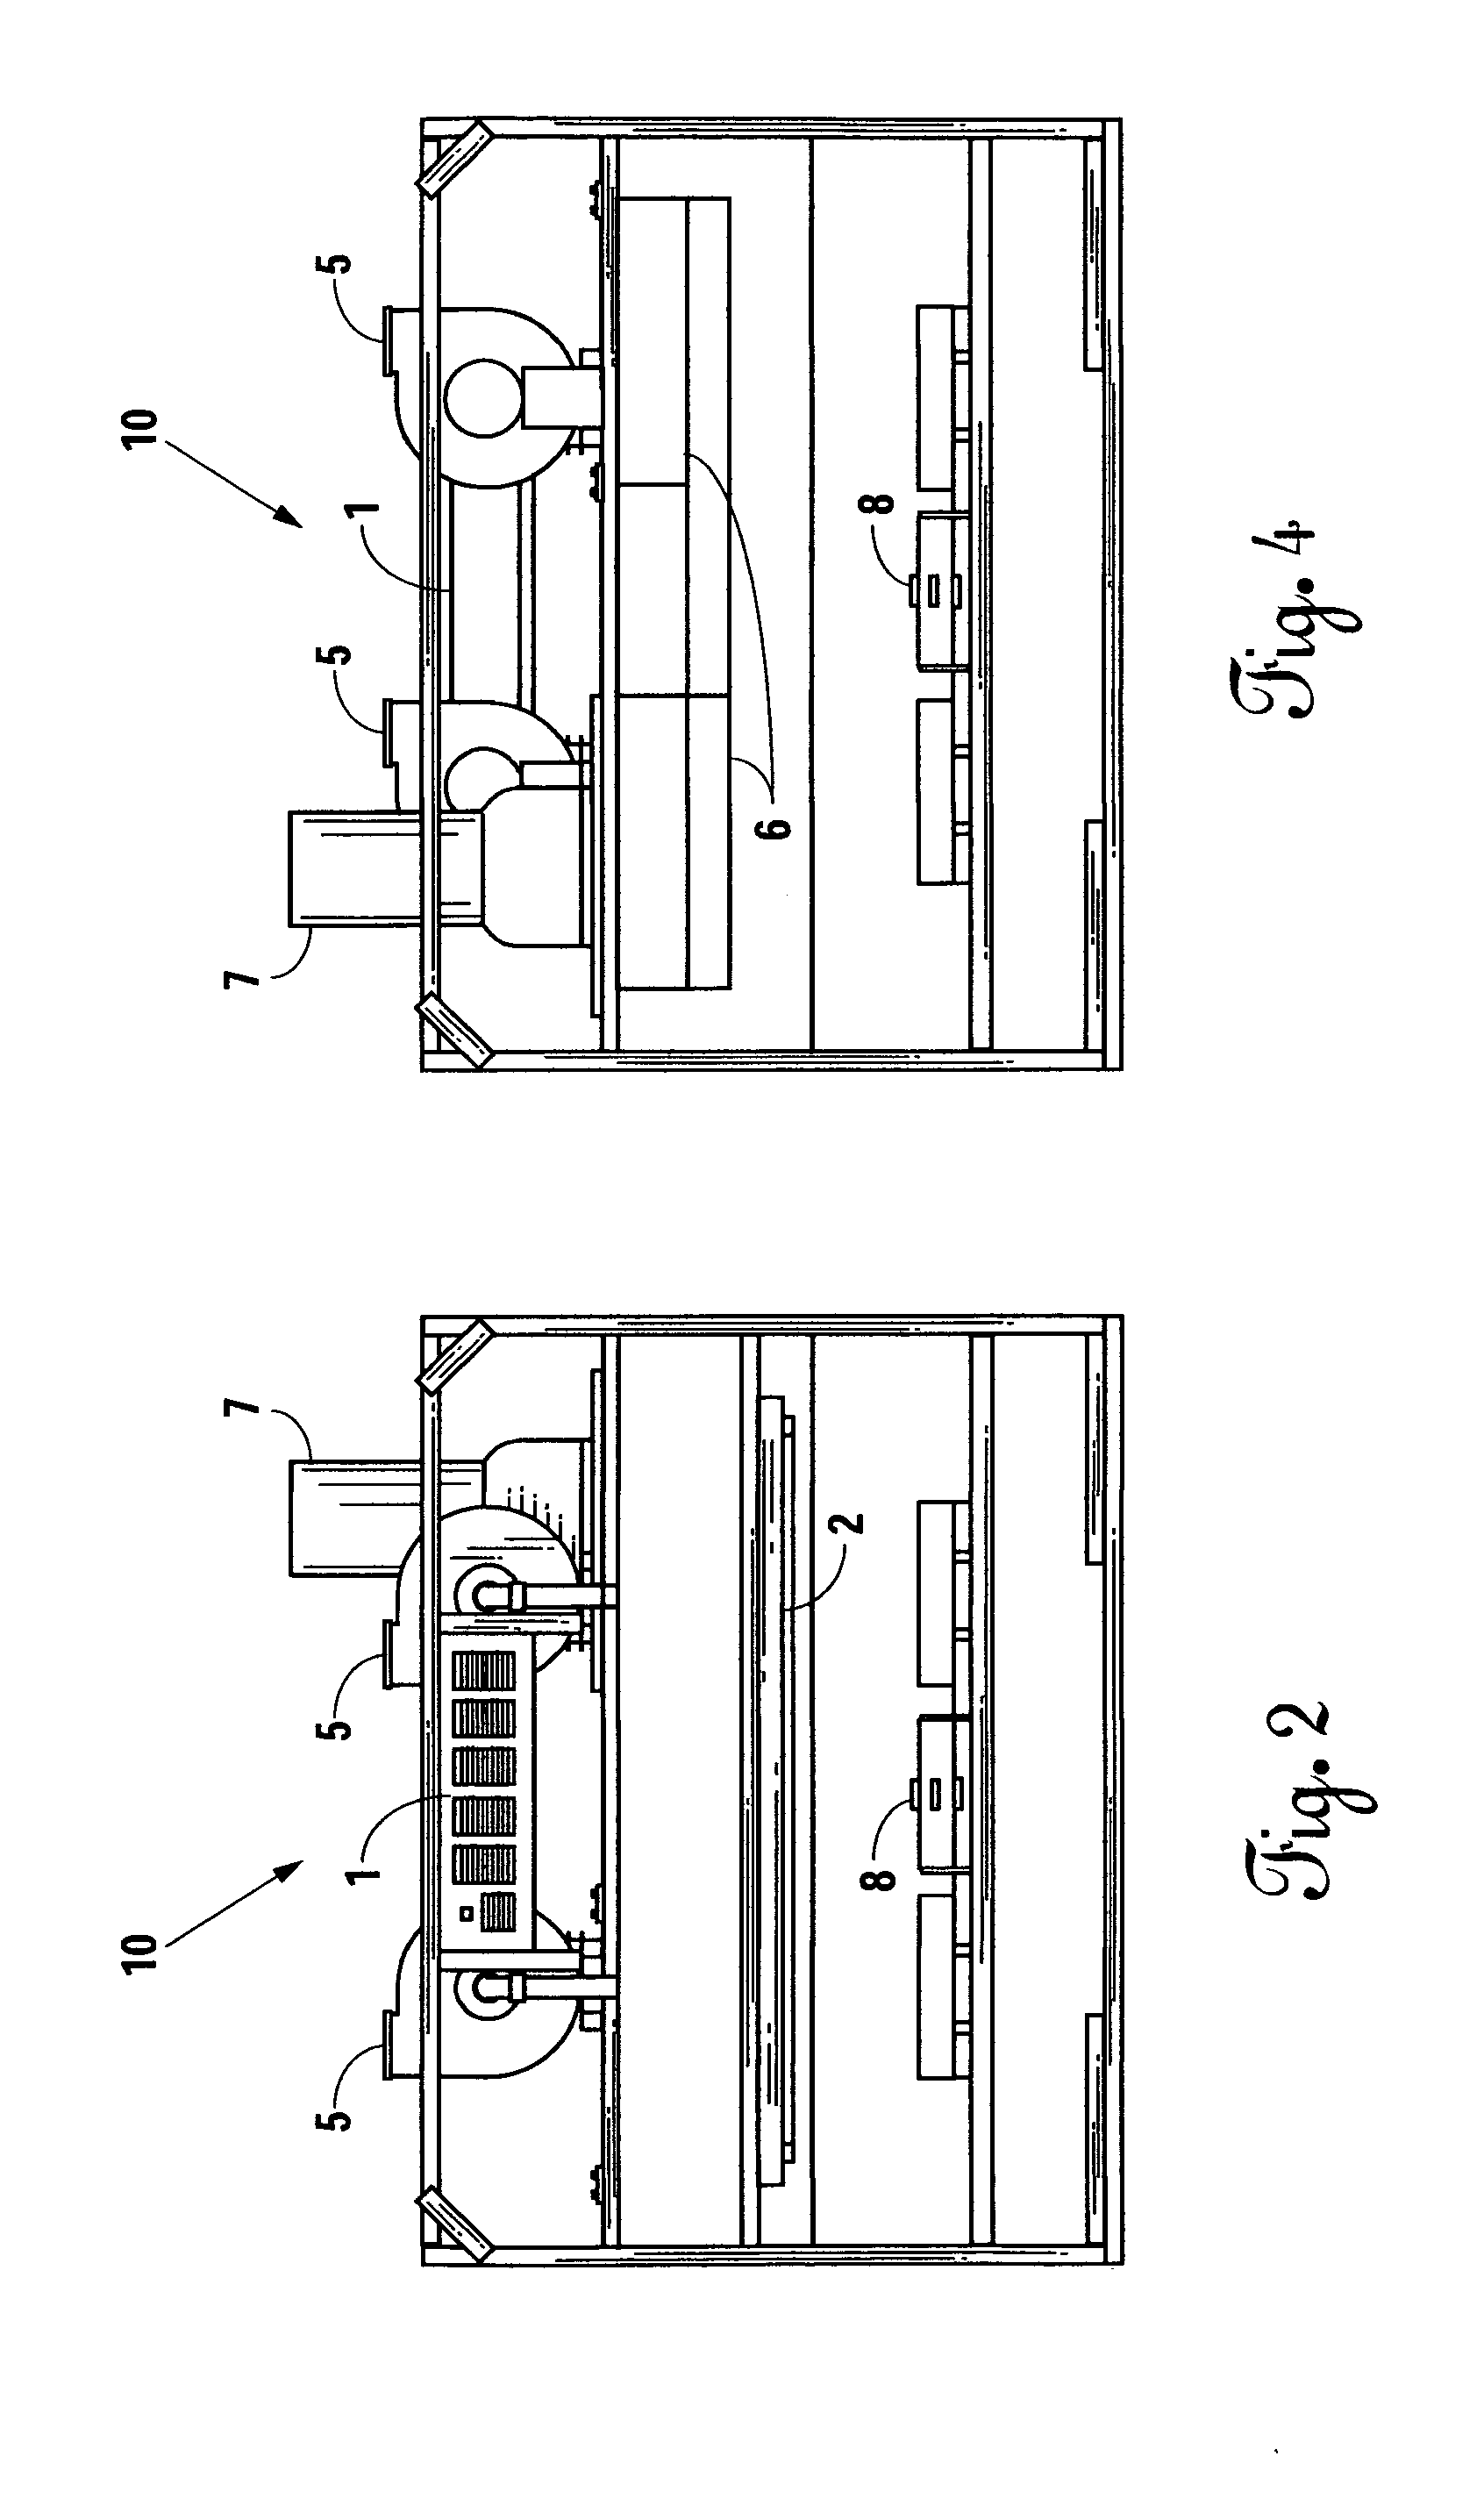 System and method for cleaning and sanitizing mattresses